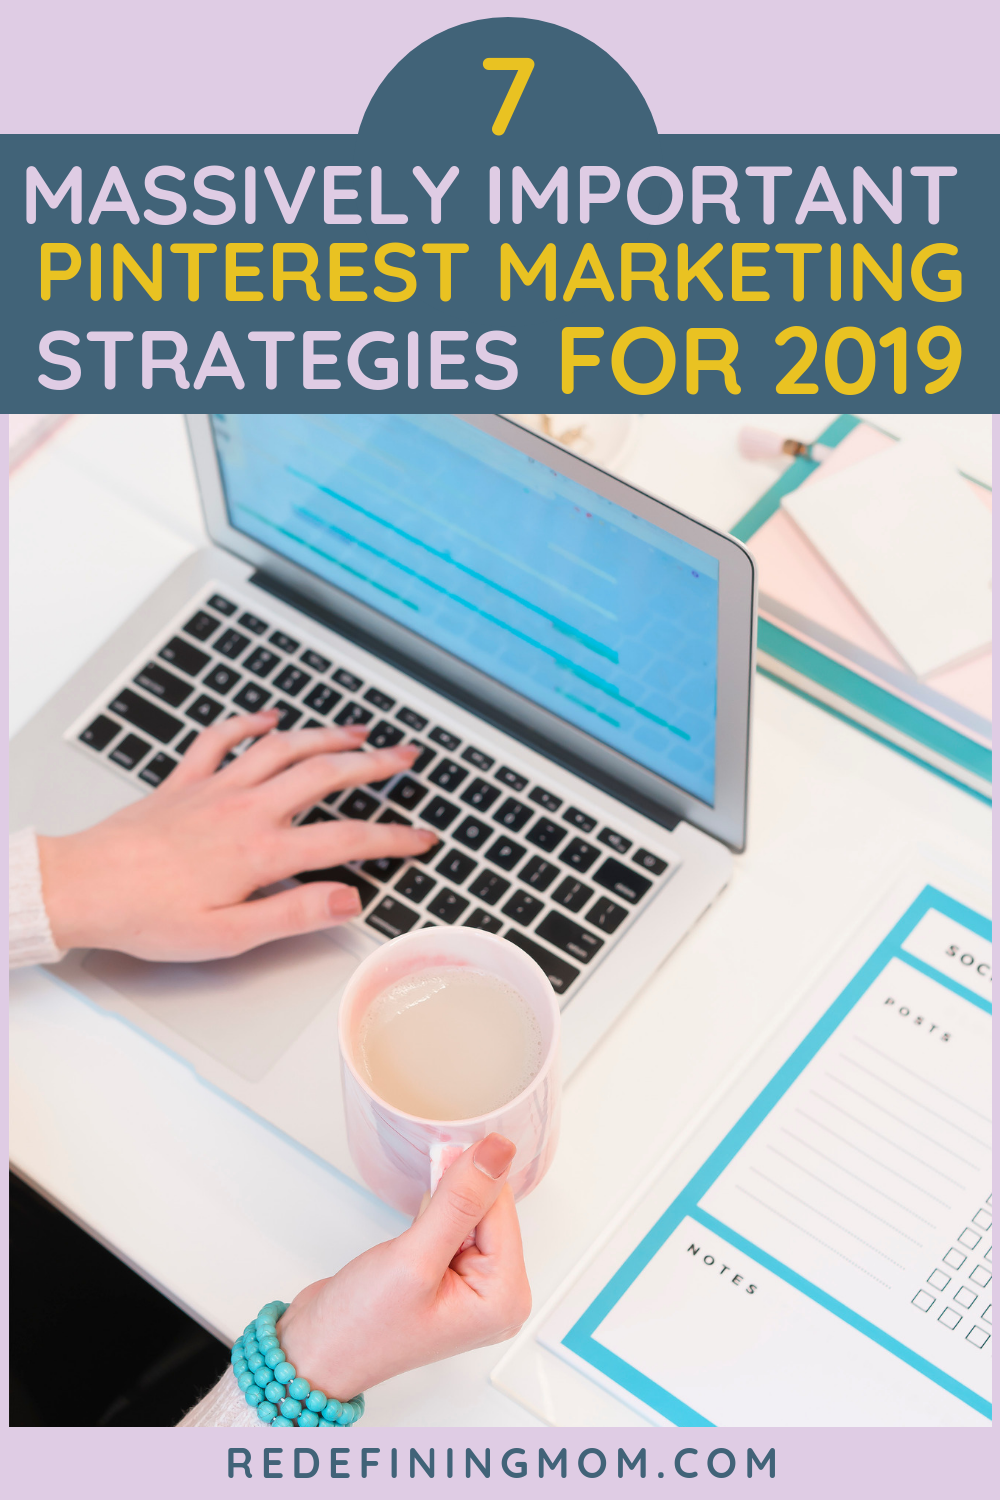 Pinterest Marketing Strategies and Tips for 2019